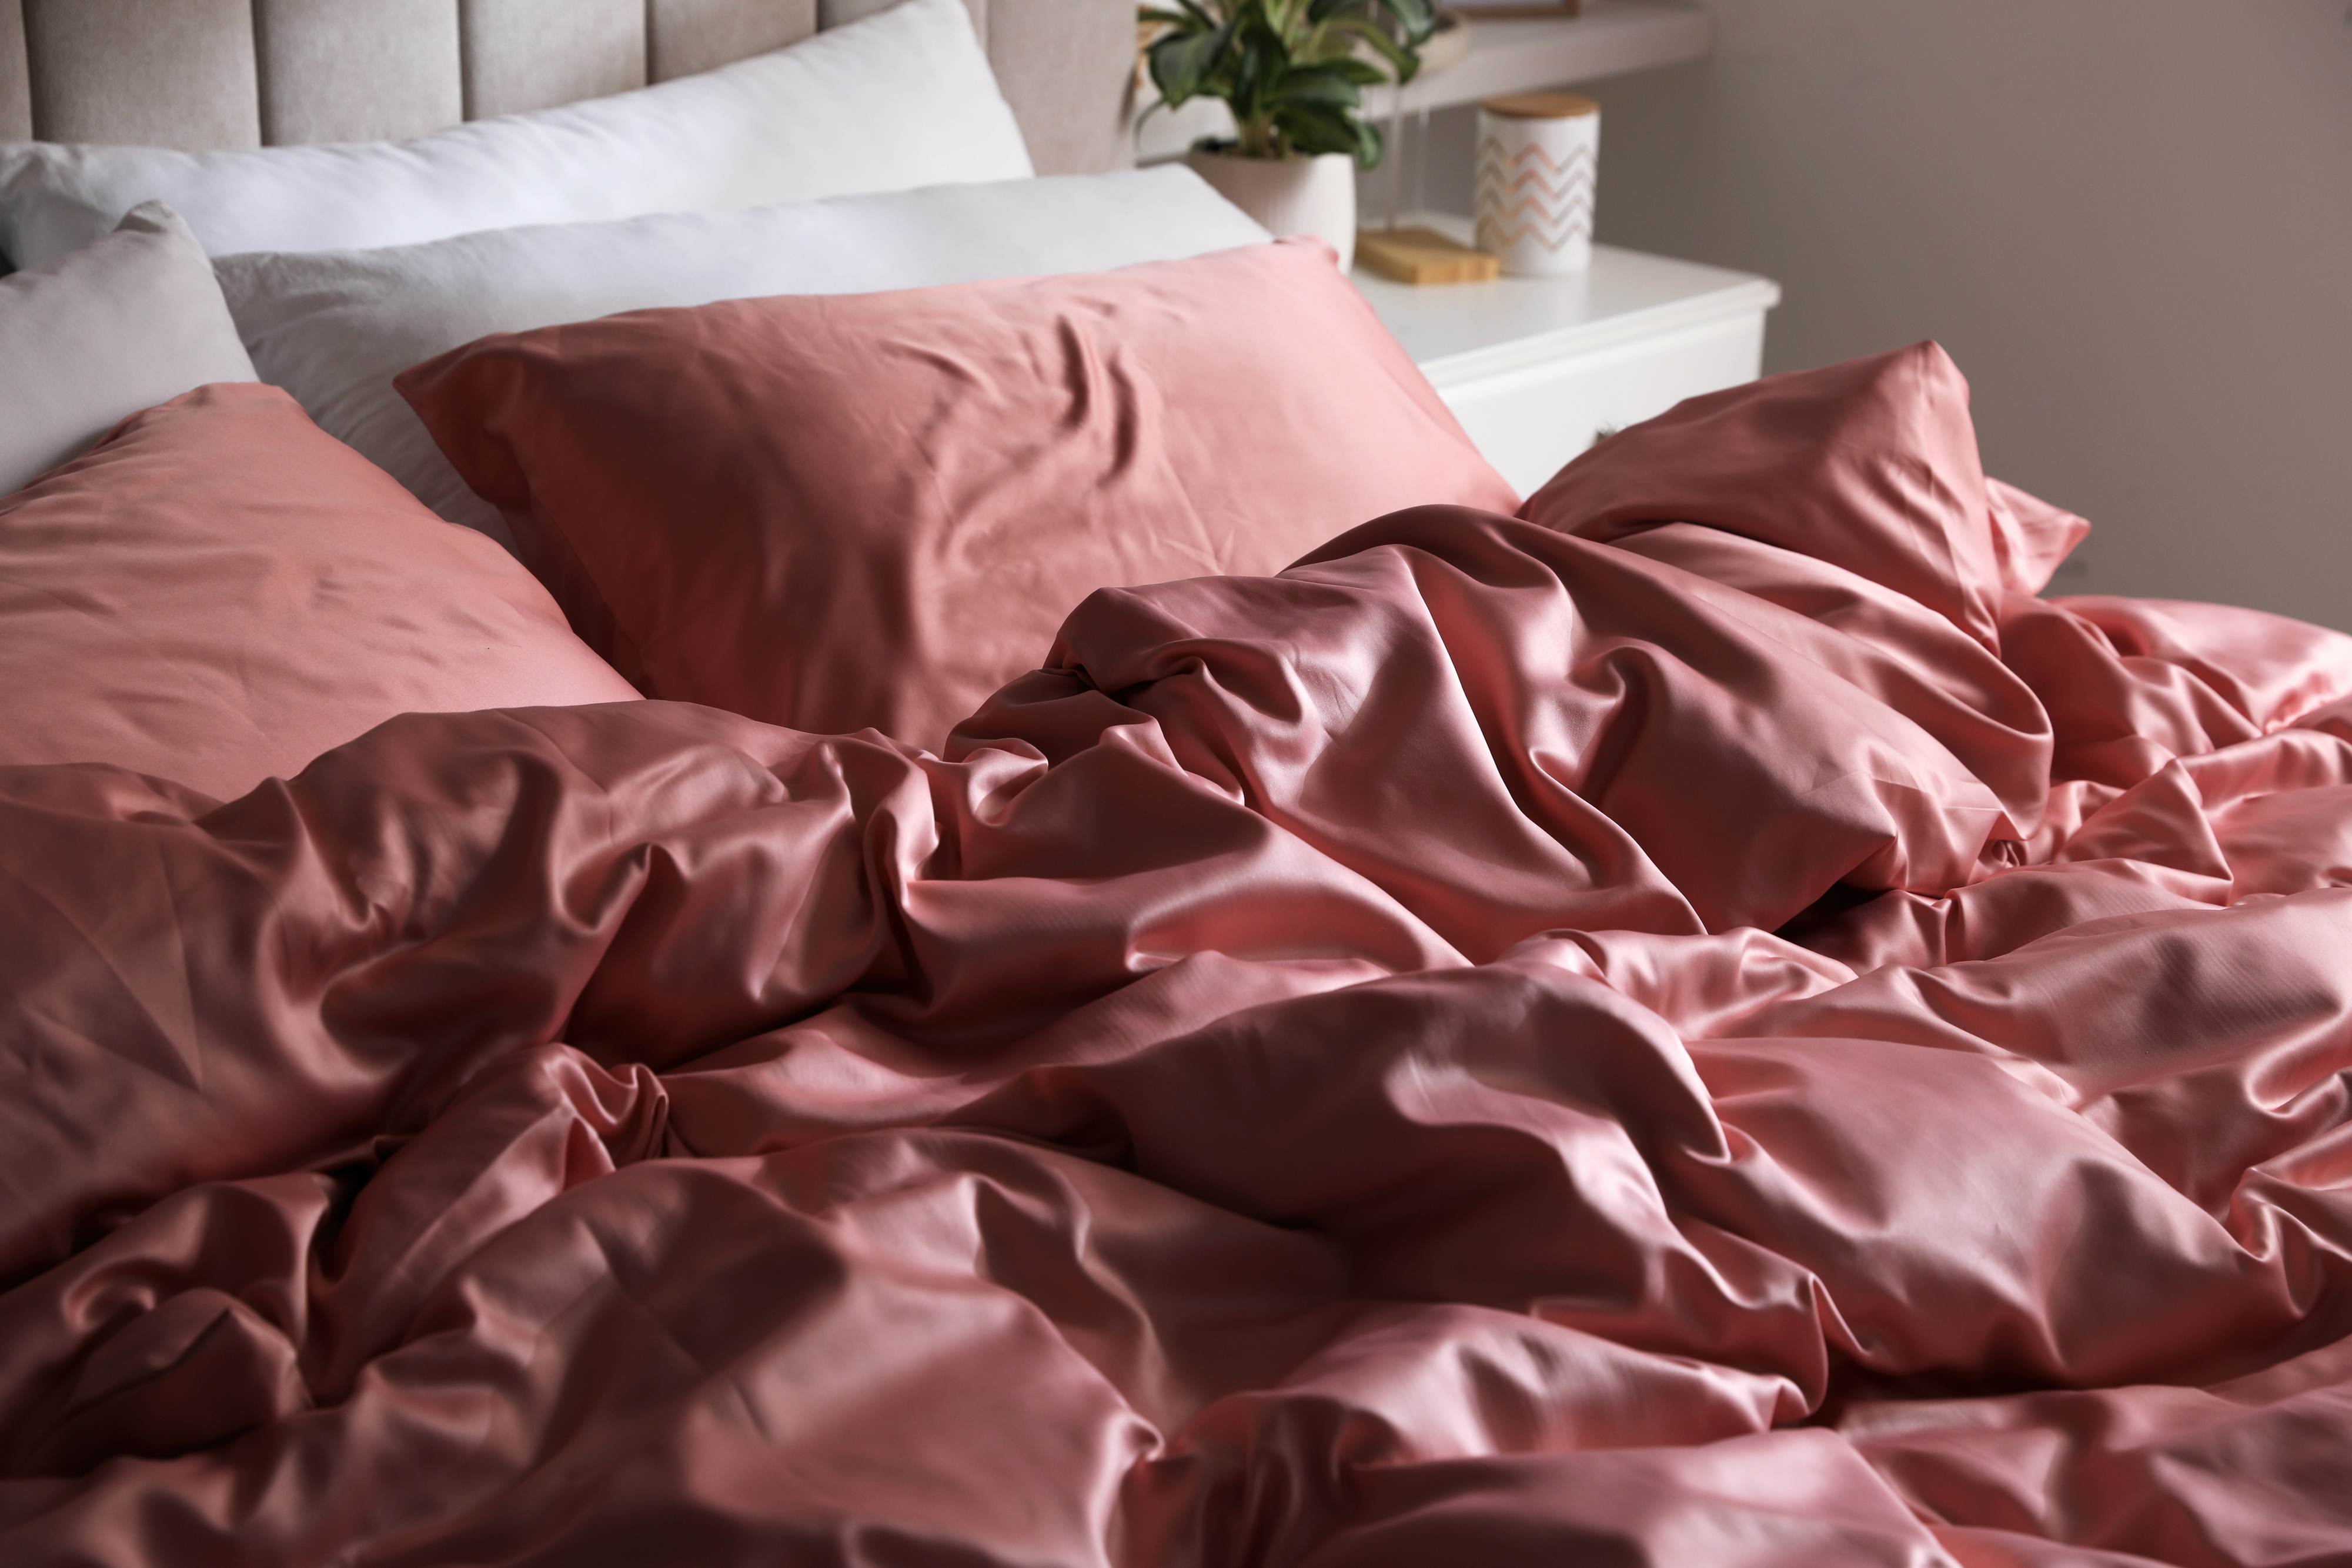 Unmade bed with rumpled pink sheets and pillows, suggesting recent use or lack of tidiness